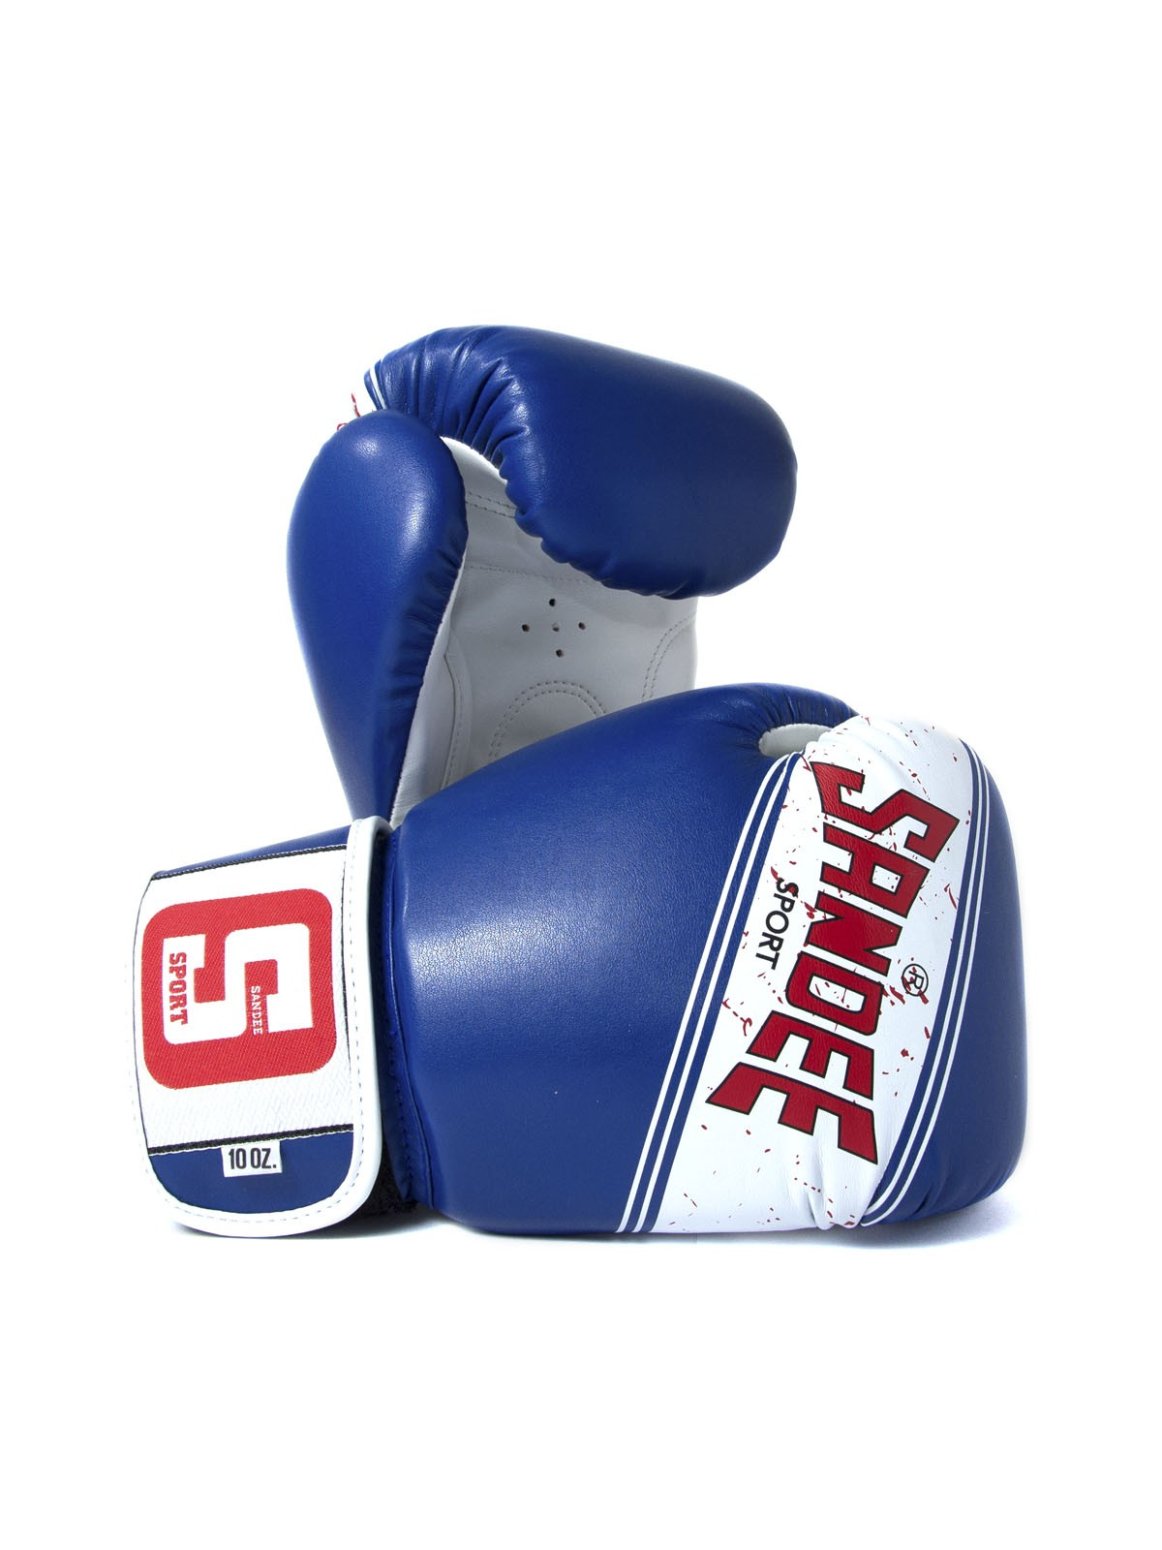 Sandee Sport Muay Thai Boxing Gloves - Blue - Click Image to Close